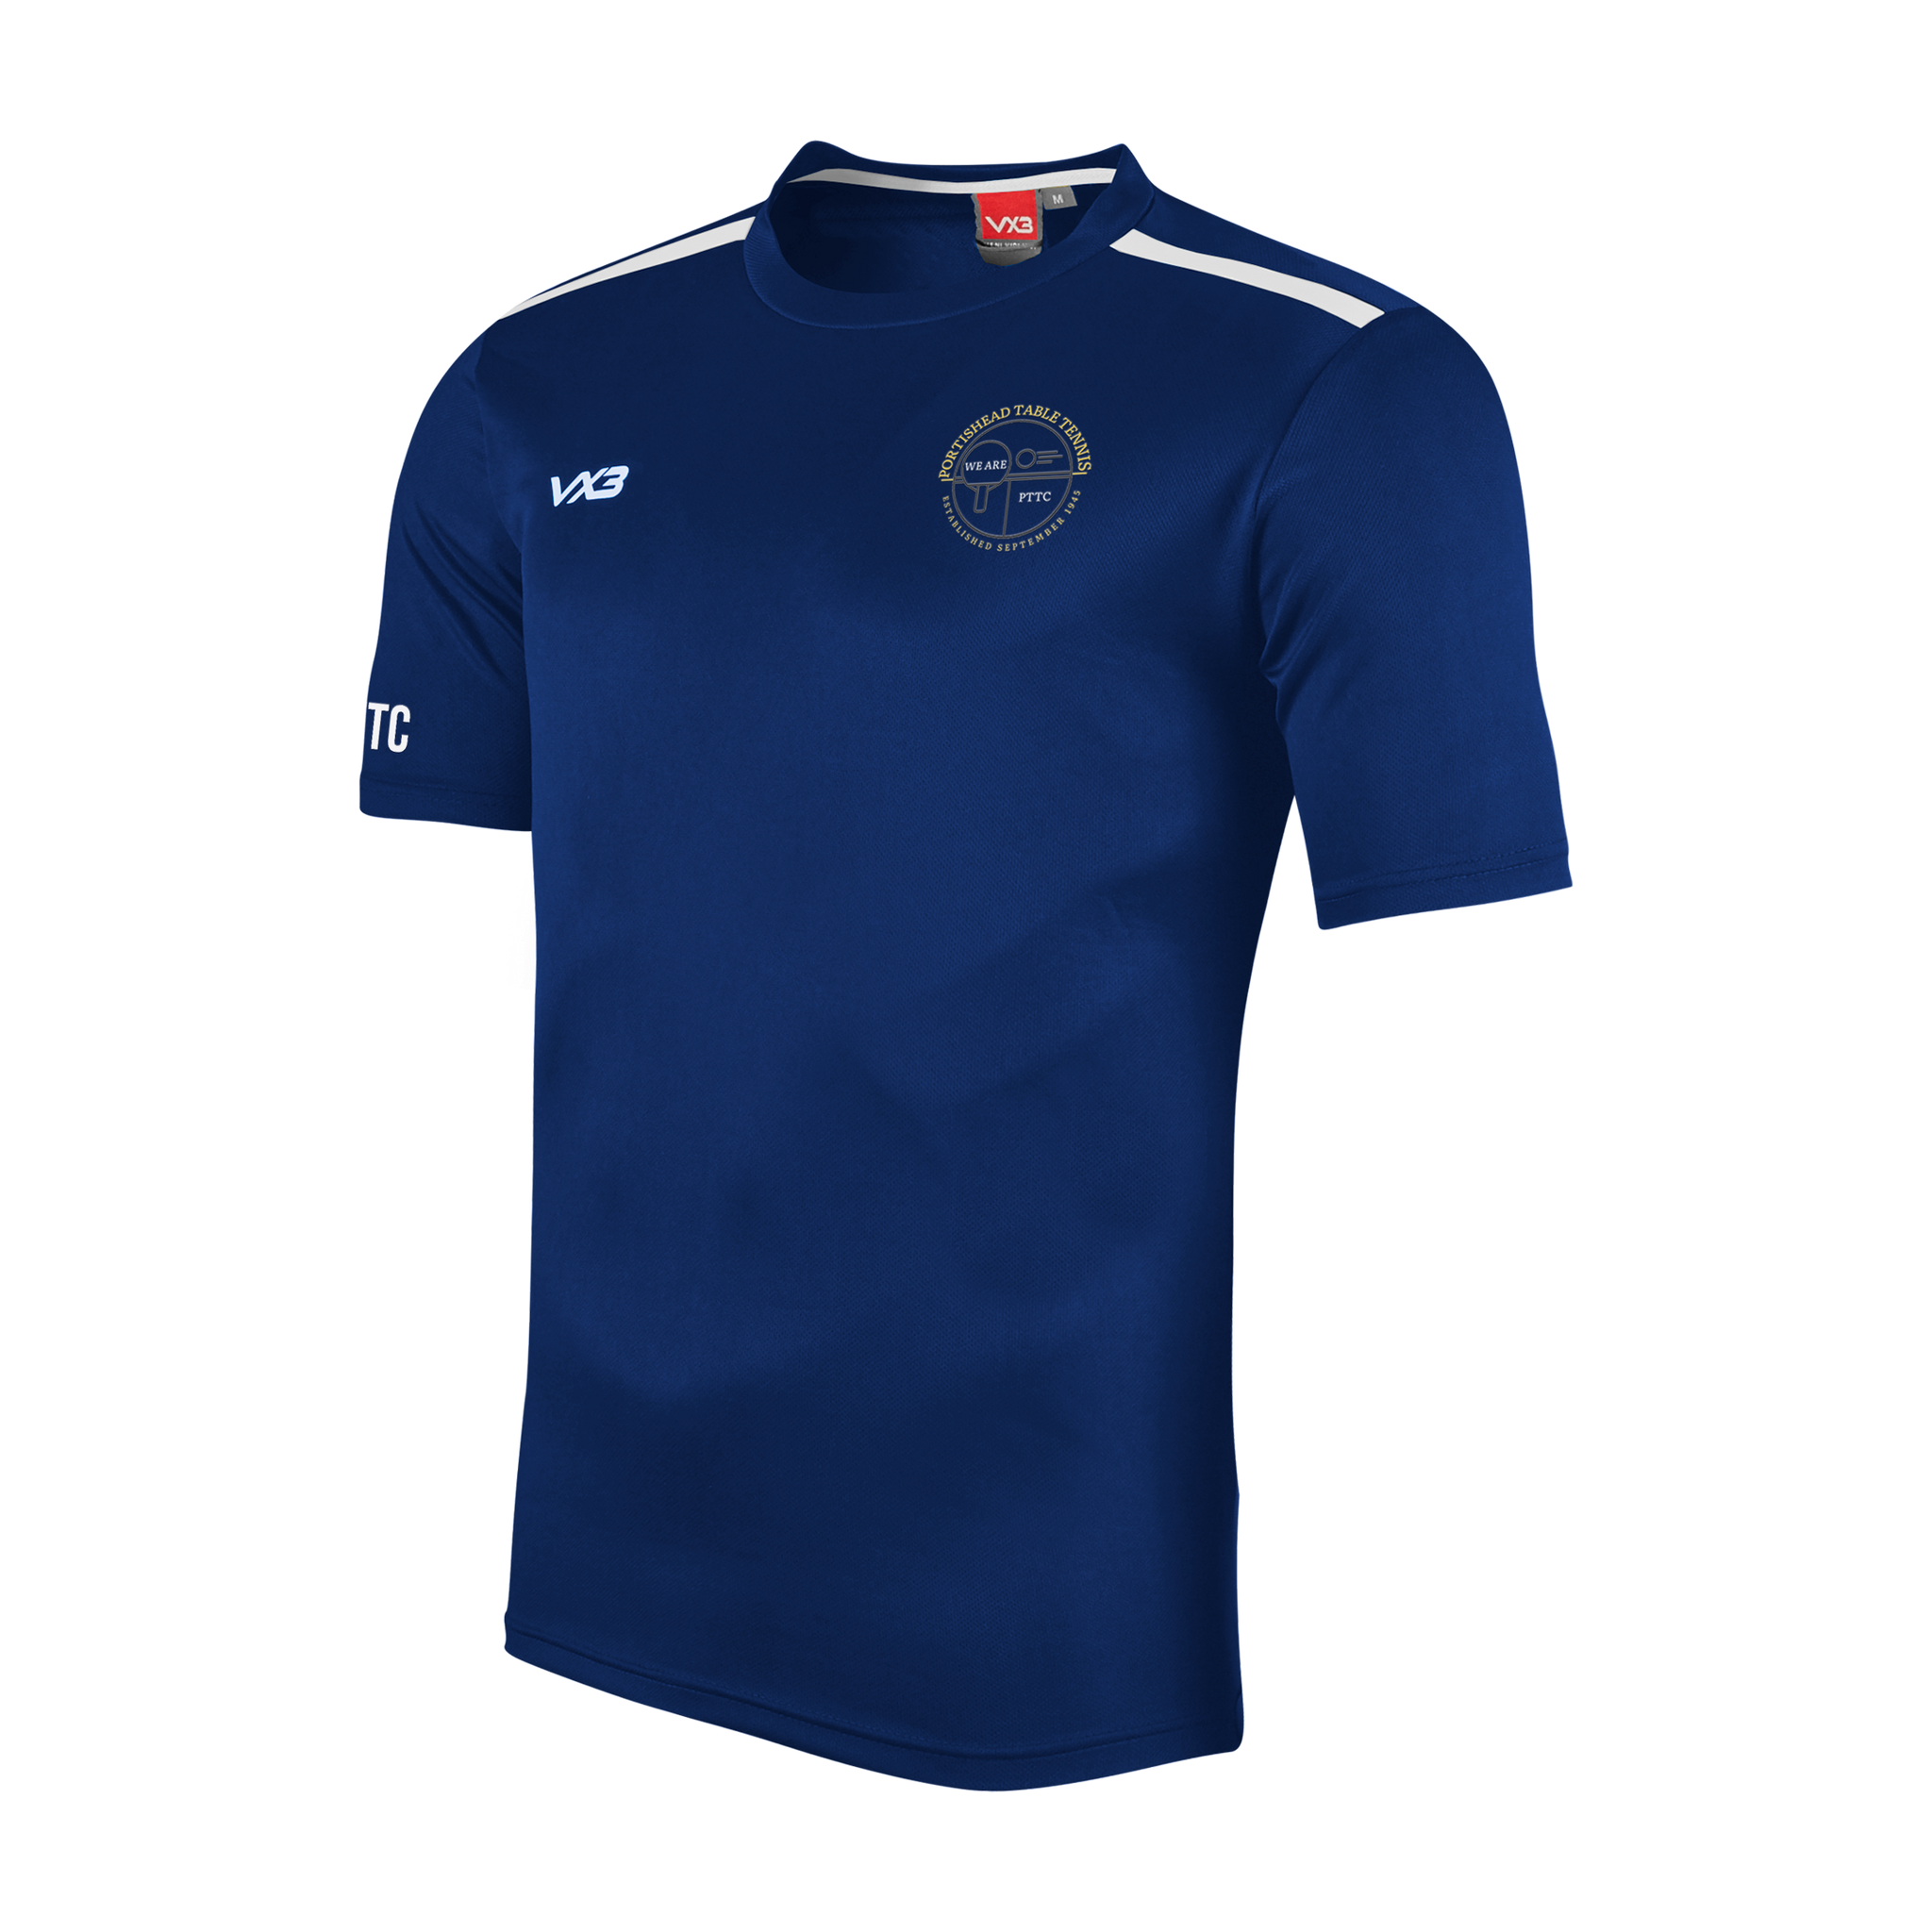 Portishead Table Tennis Club Youth Fortis Tee Navy